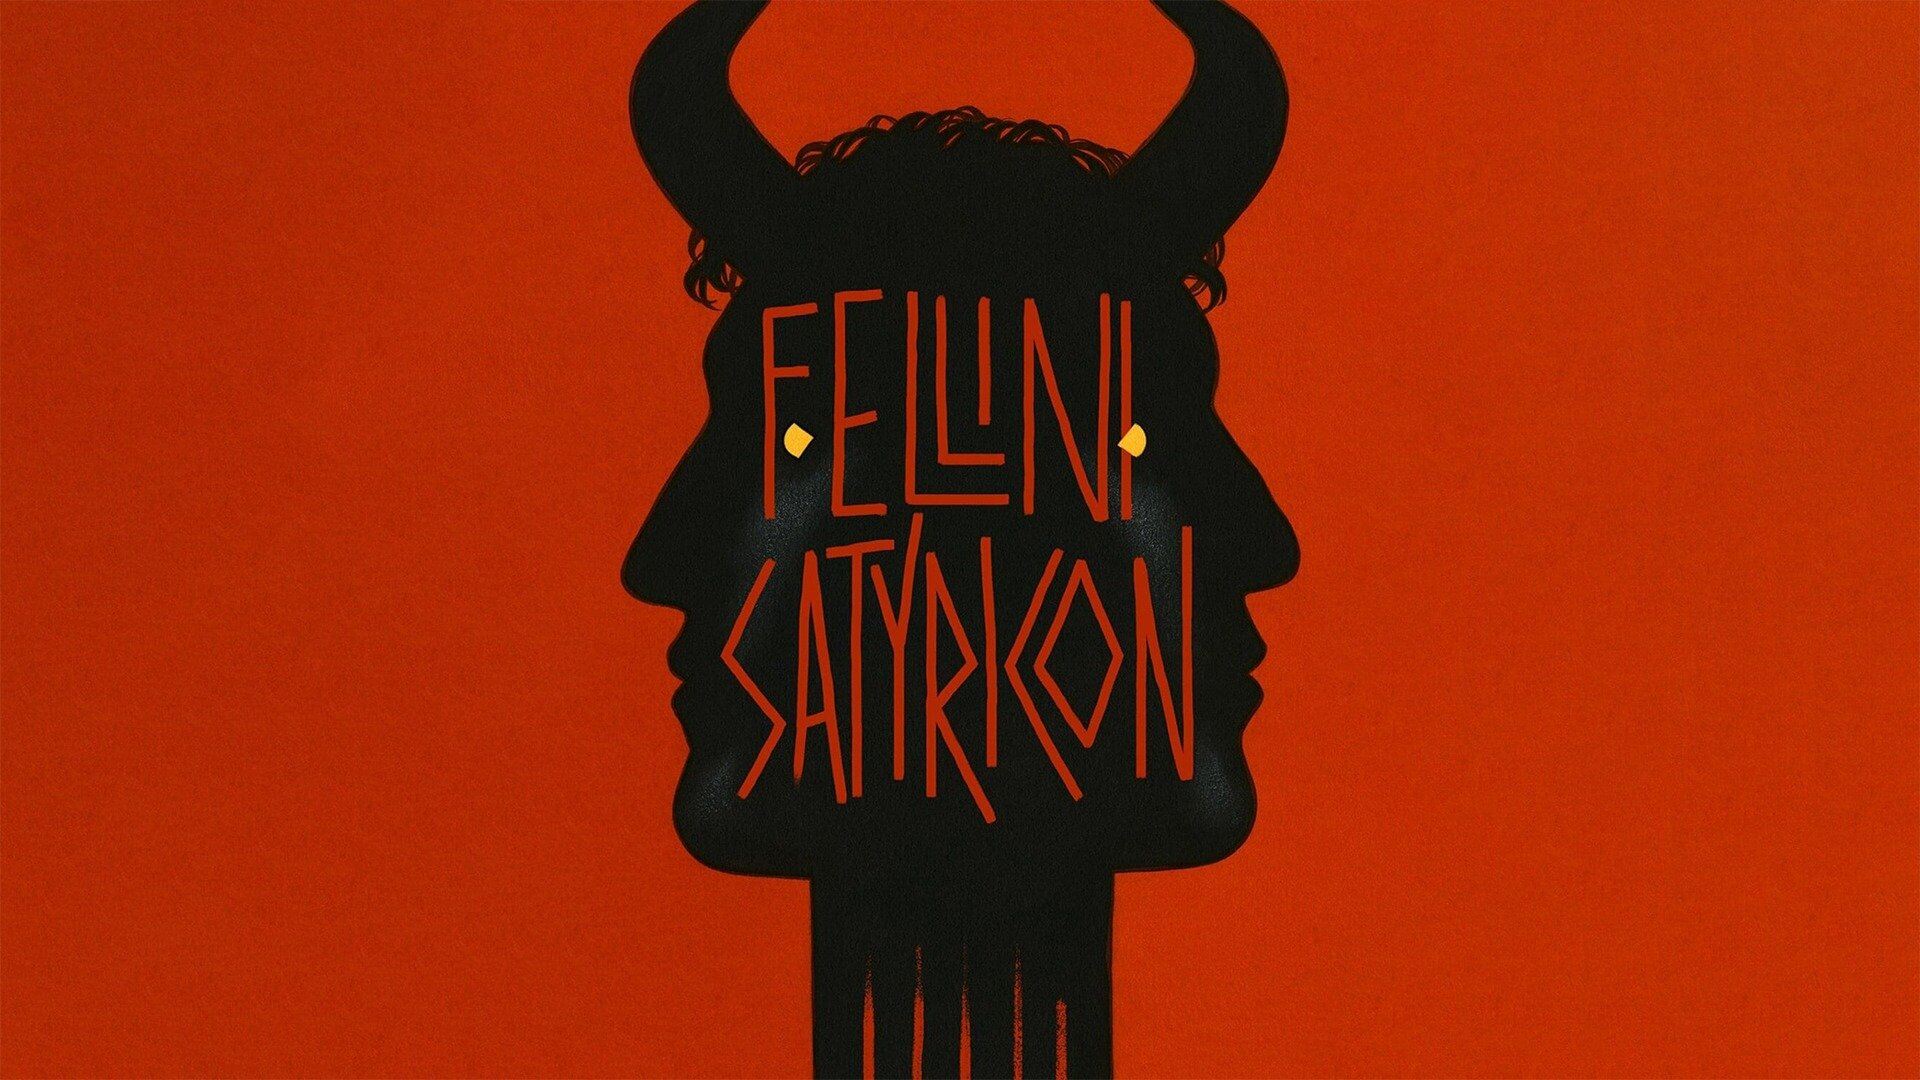 37-facts-about-the-movie-fellini-satyricon